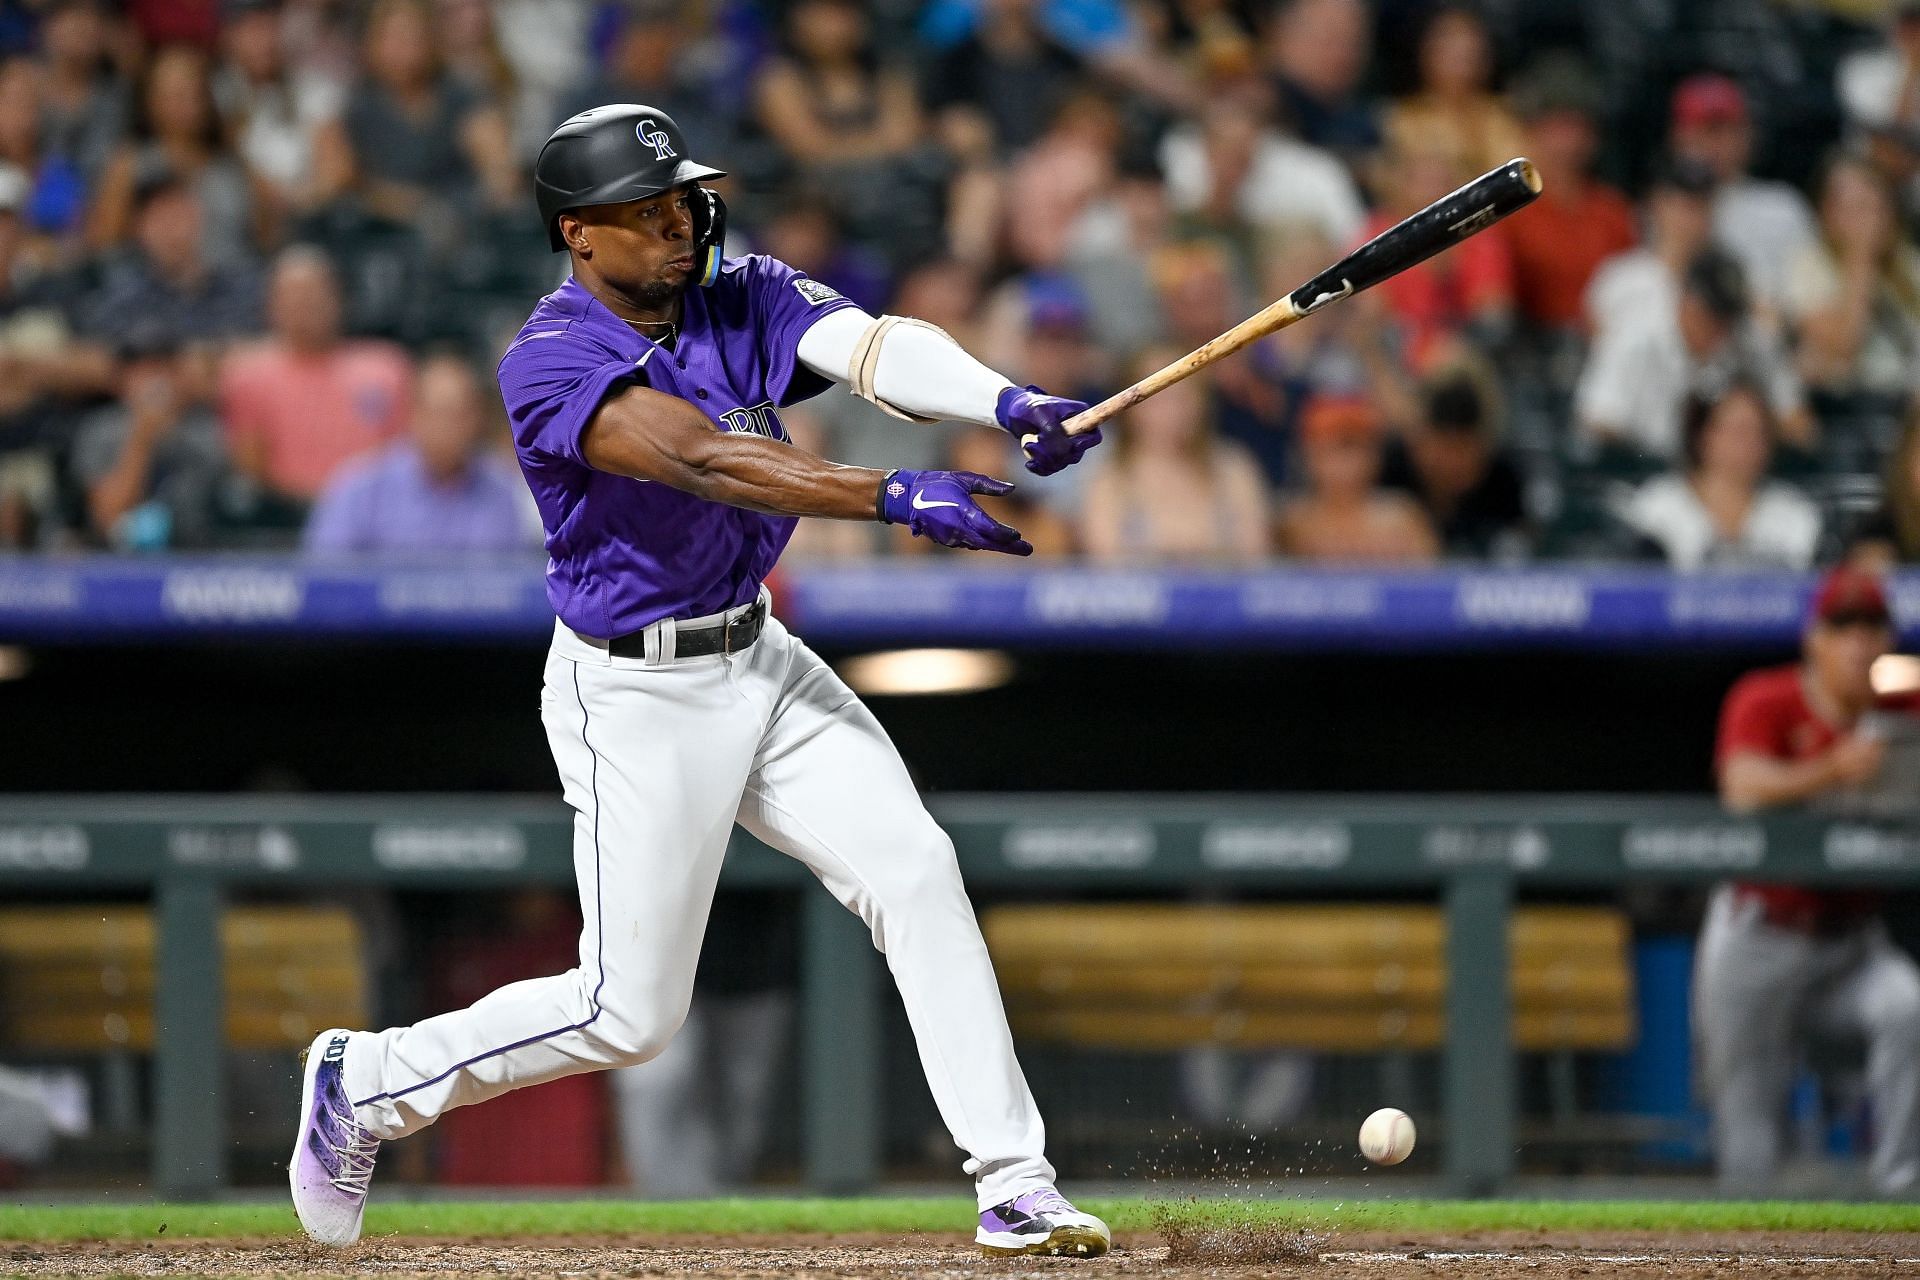 Wynton Bernard #36 of the Colorado Rockies hits a seventh inning infield single for his first career hit in his major league debut against the Arizona Diamondbacks at Coors Field on August 12, 2022